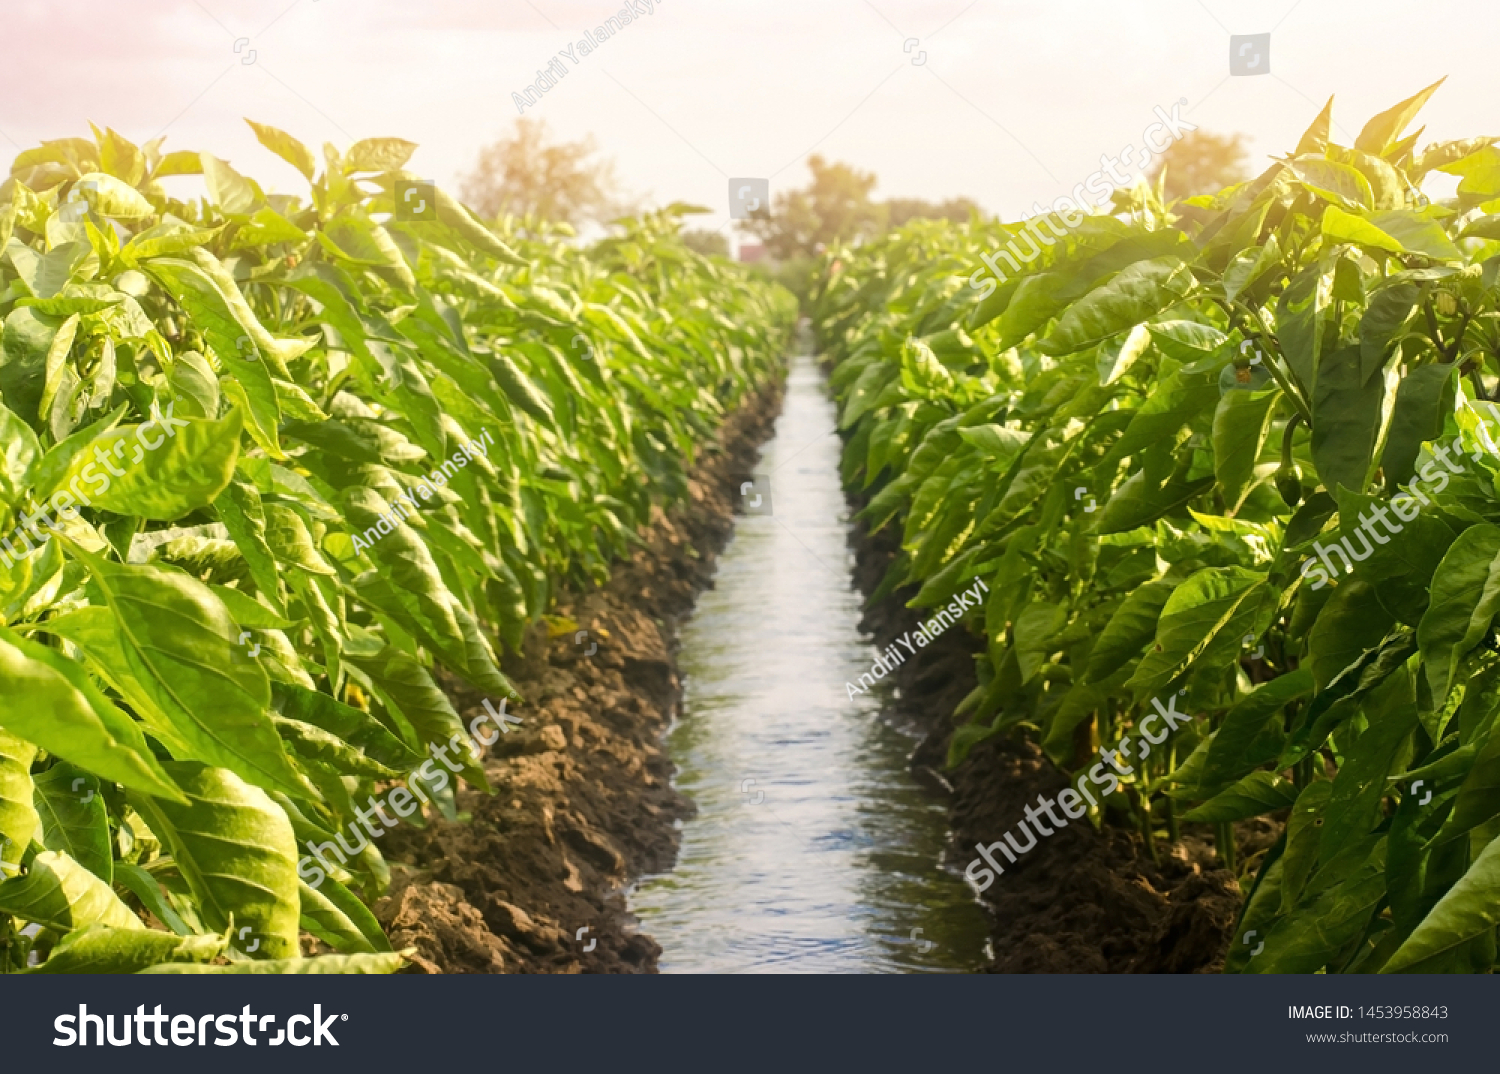 Rows pepper plantation divided by irrigation water channel. traditional method of watering the fields. Cultivation, care of the pepper plantation. Beautiful farm field. Farming and agriculture #1453958843